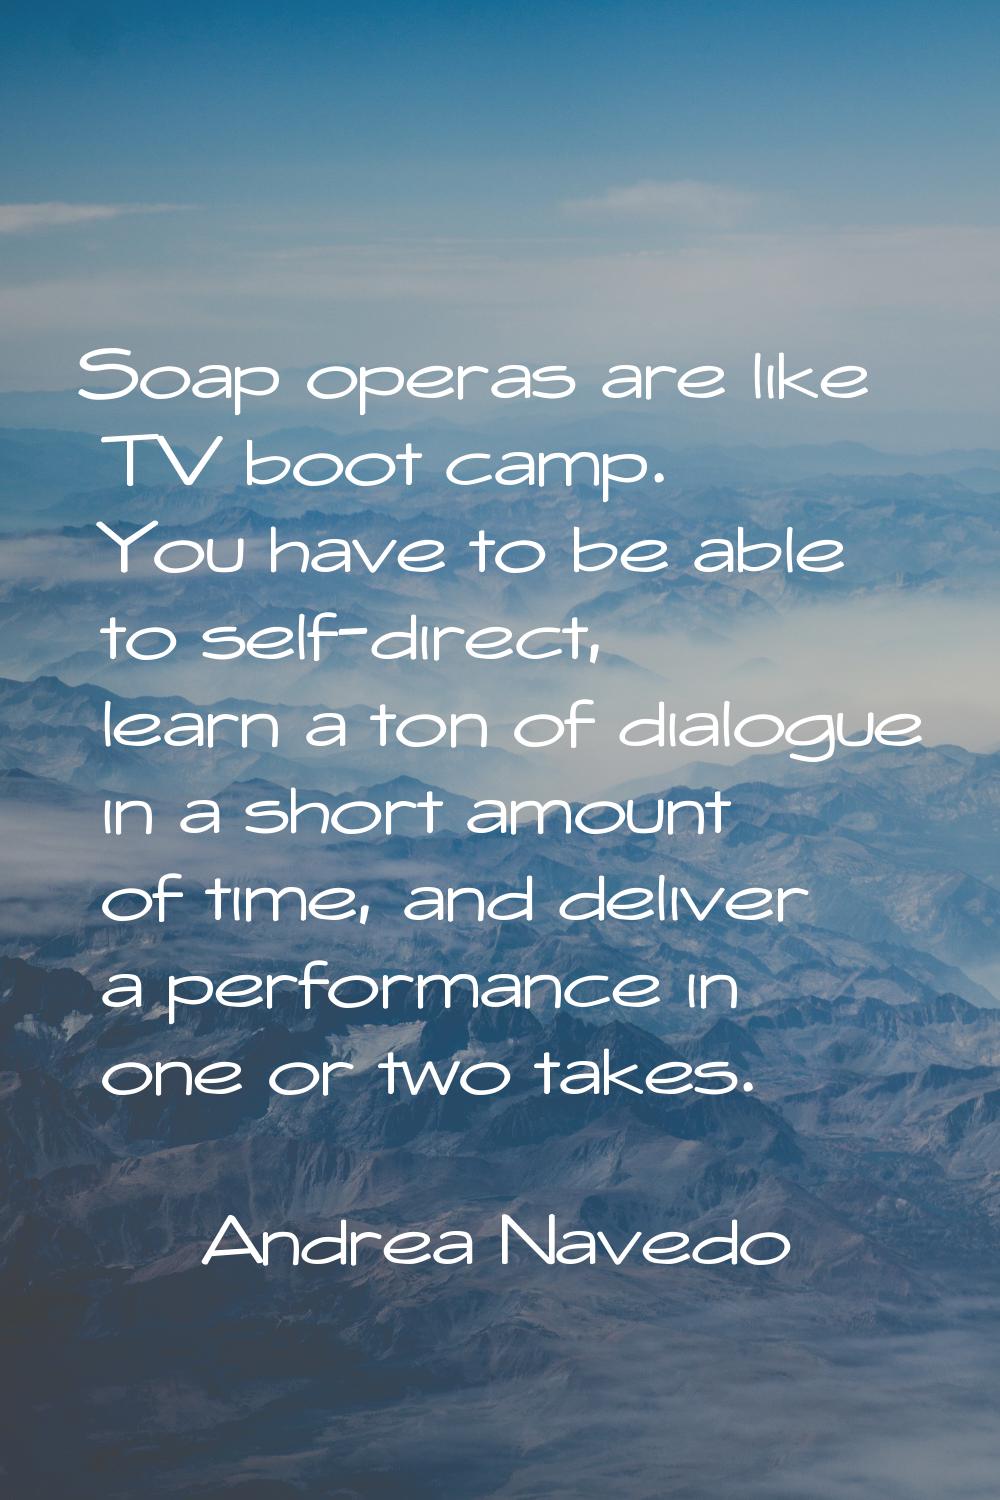 Soap operas are like TV boot camp. You have to be able to self-direct, learn a ton of dialogue in a